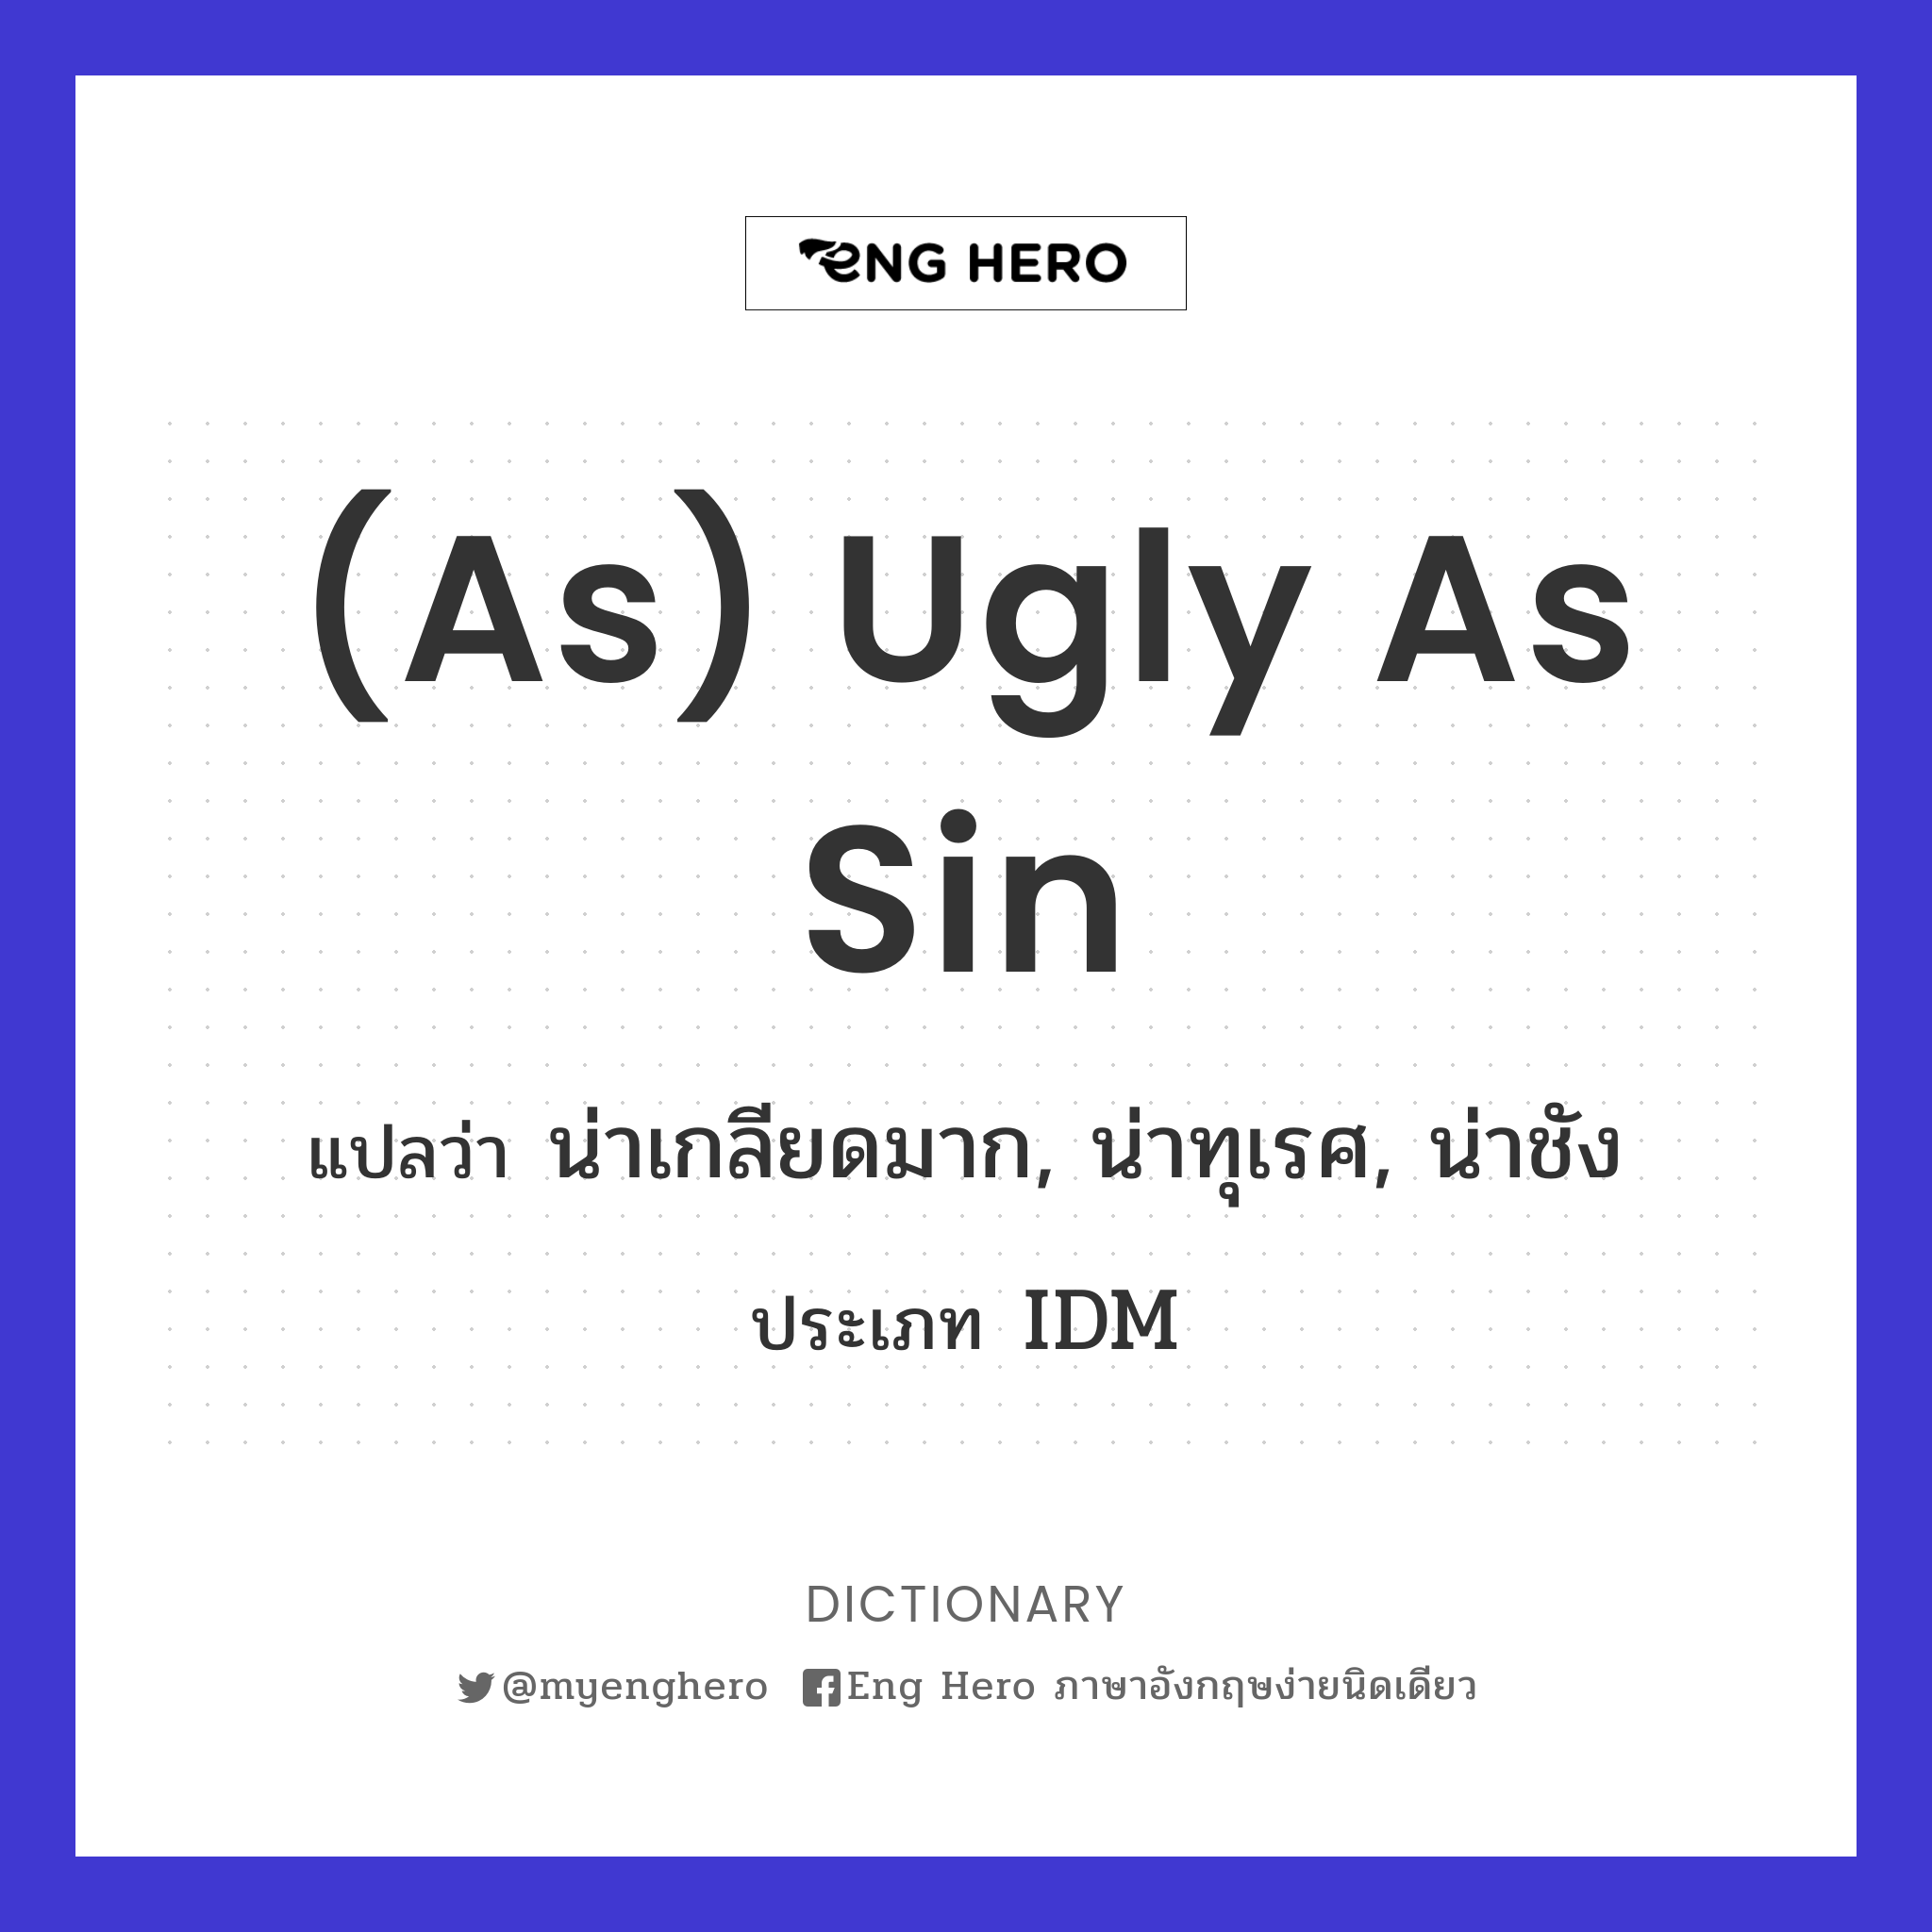 (as) ugly as sin